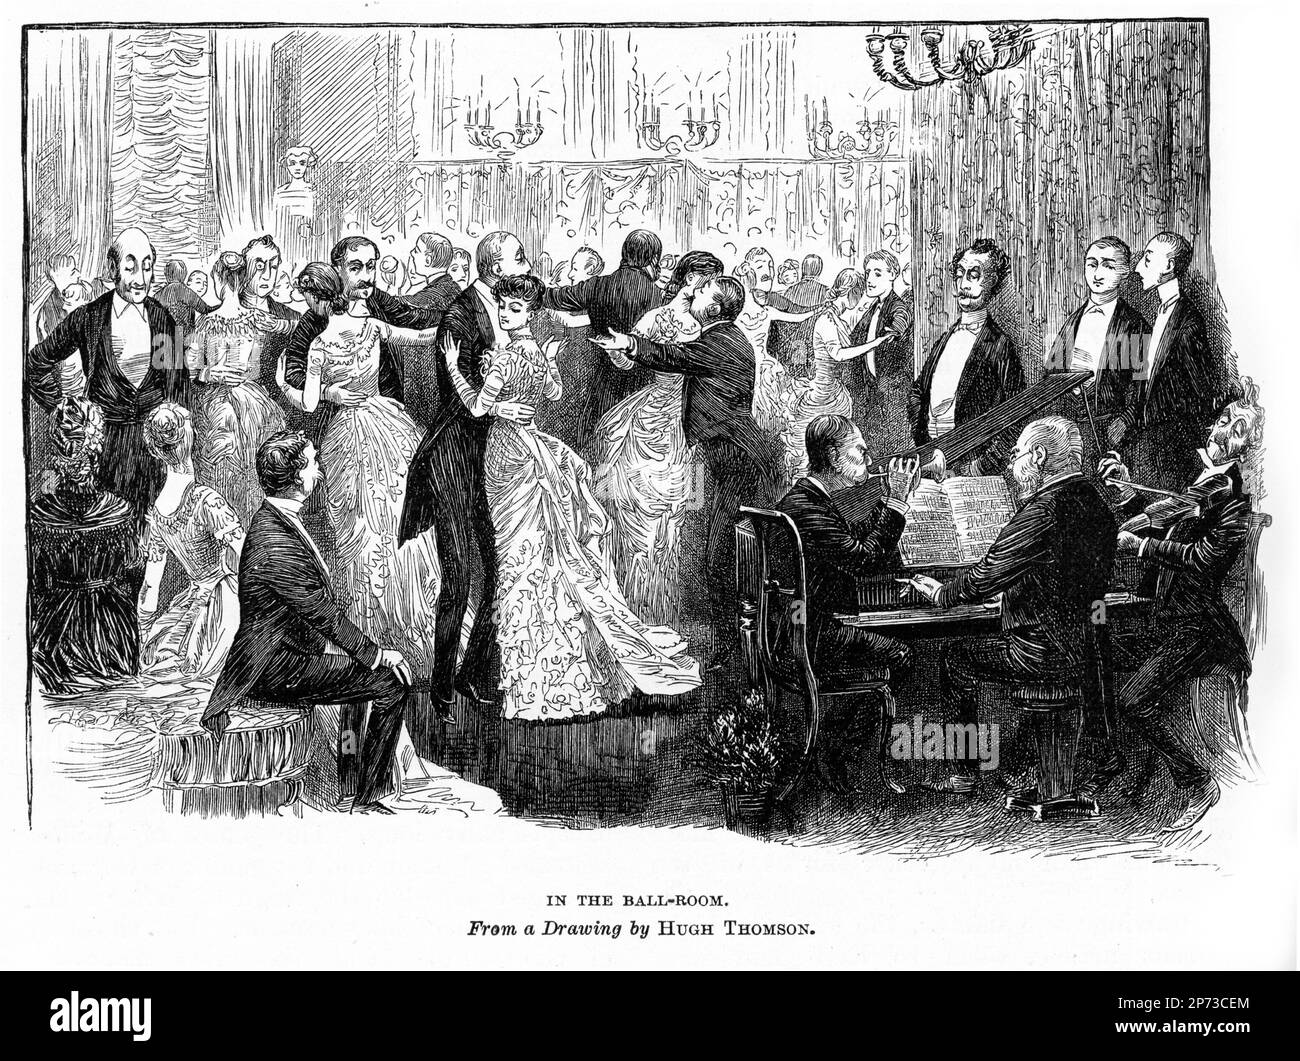 Engraving of people enjoying an evening in the ball-room, circa 1880 Stock Photo